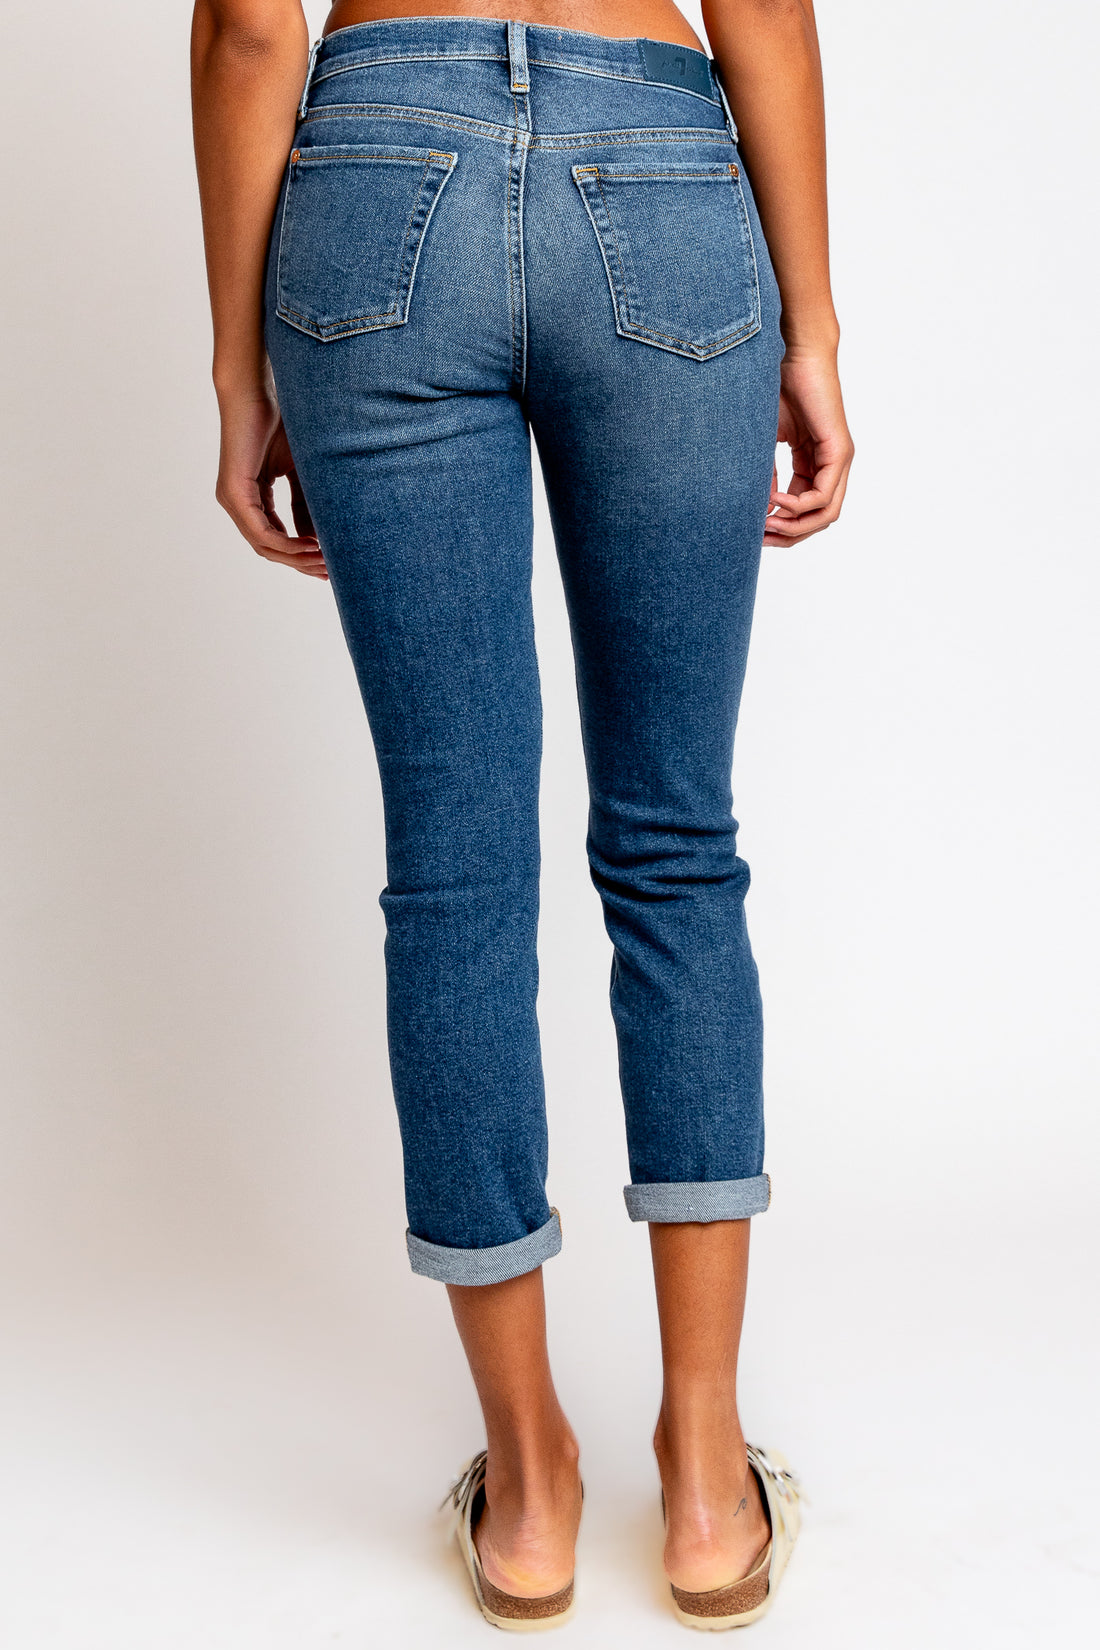 7 For All Mankind Josefina in Blue Print